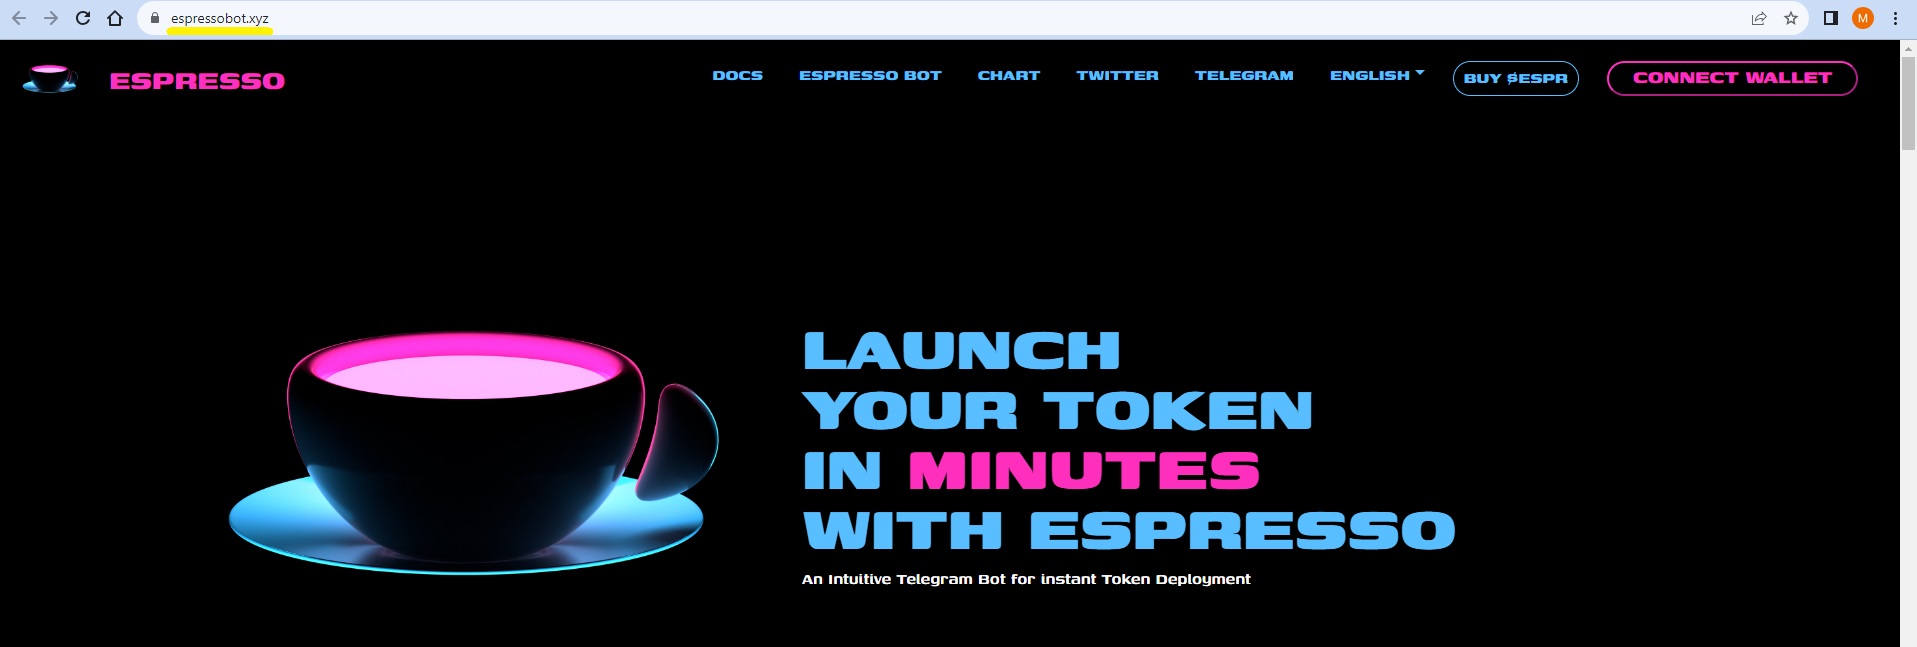 EspressoBot crypto project's official website